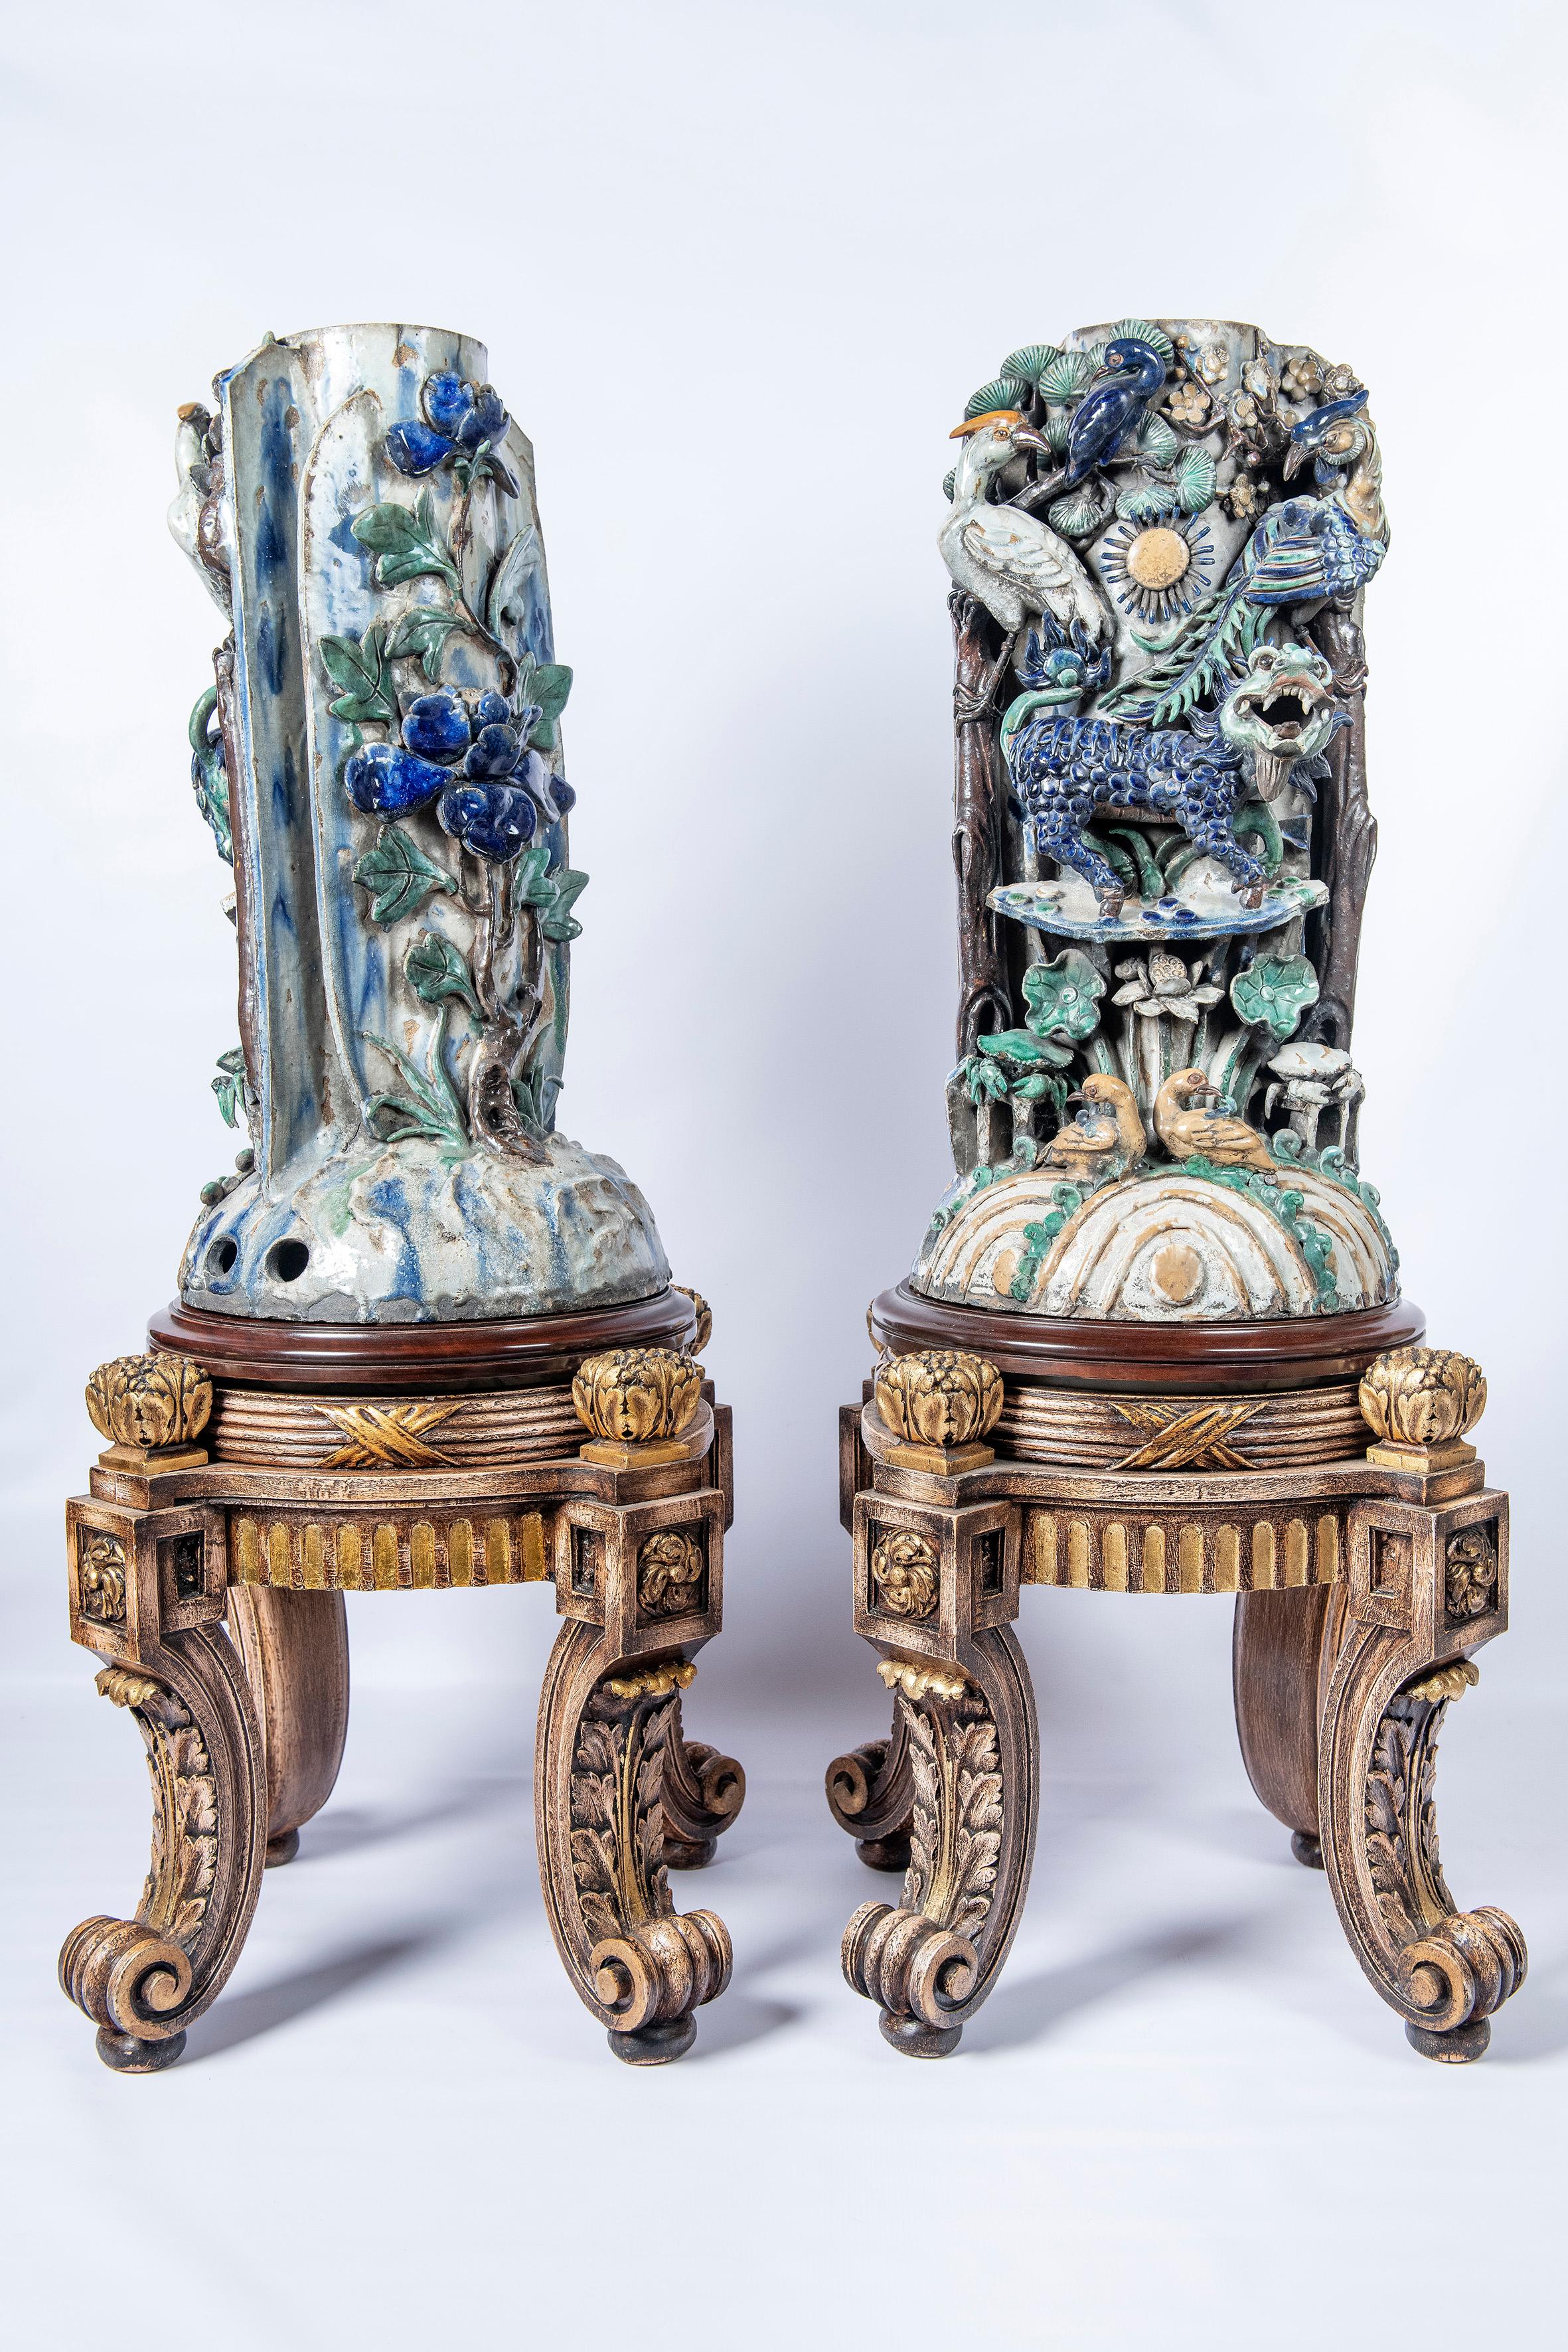 Pair of Glazed Ceramic Chinese Tiles, China, Early 20th Century For Sale 2